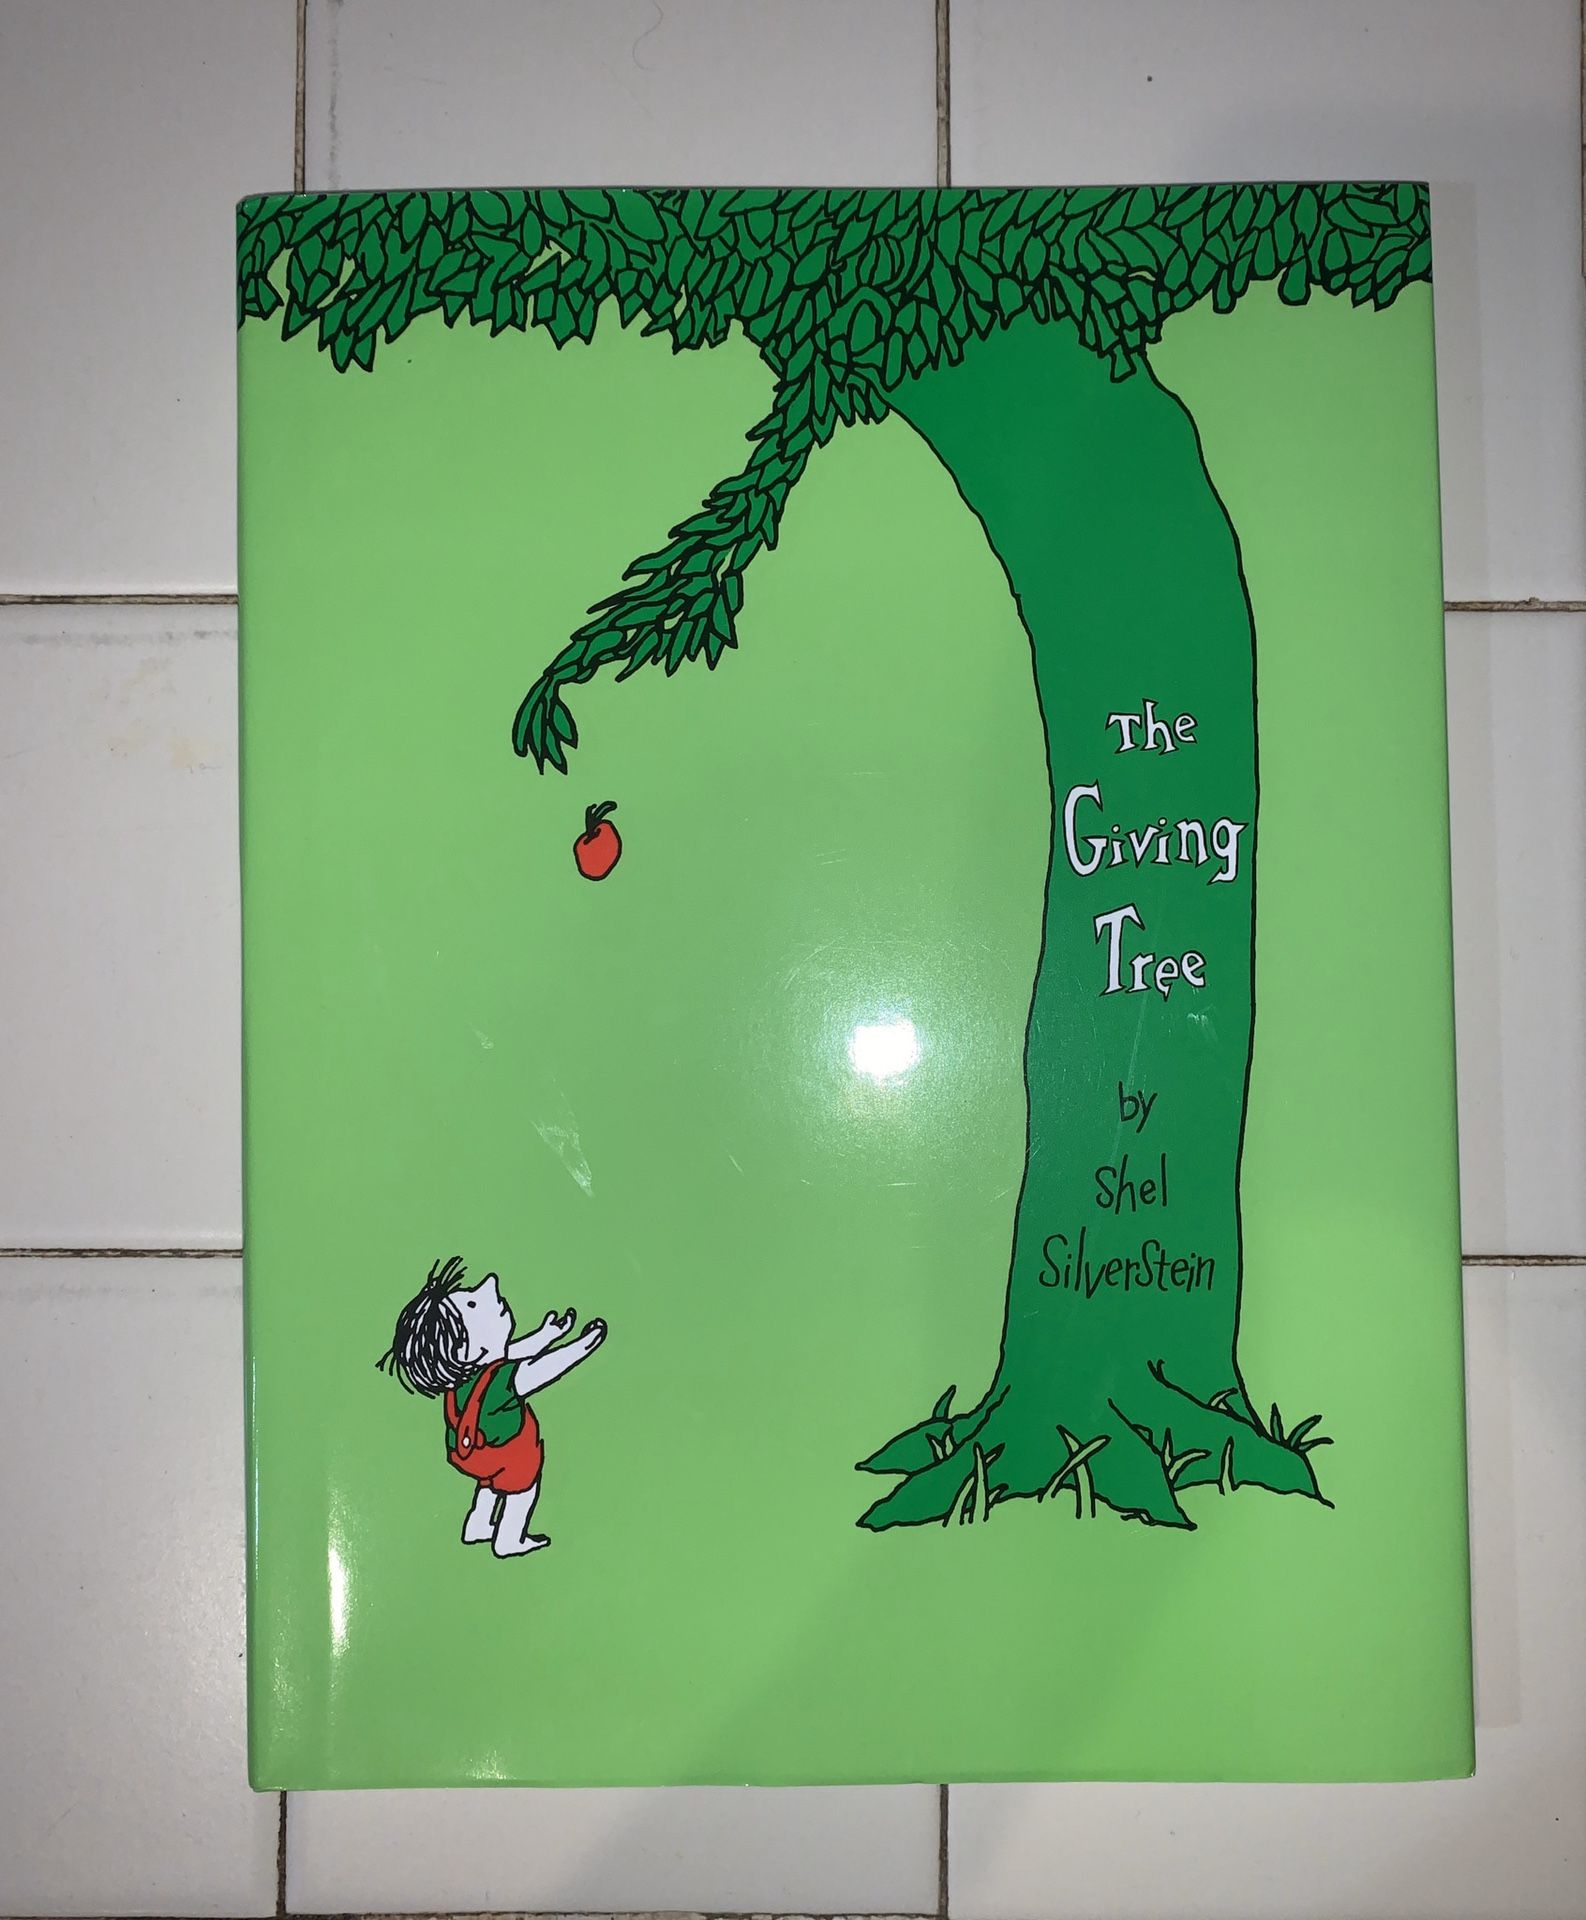 Brand new The Giving Tree by Shel Silverstein